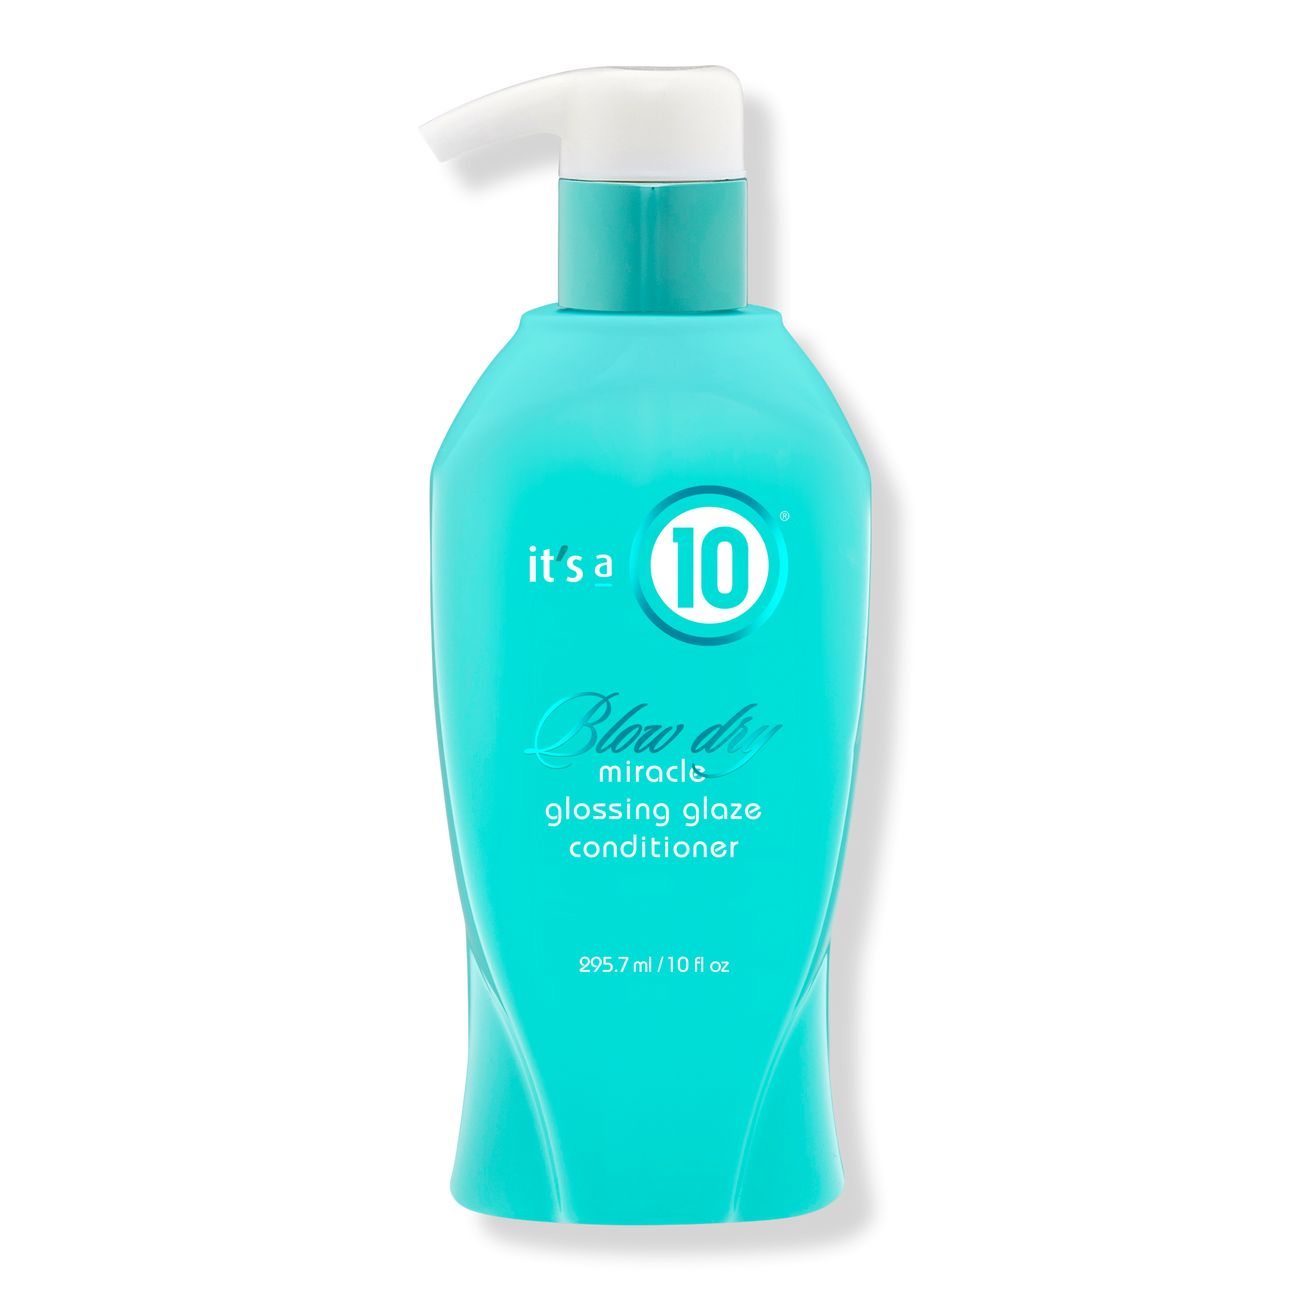 Blow Dry Miracle Glossing Glaze Conditioner | Ulta